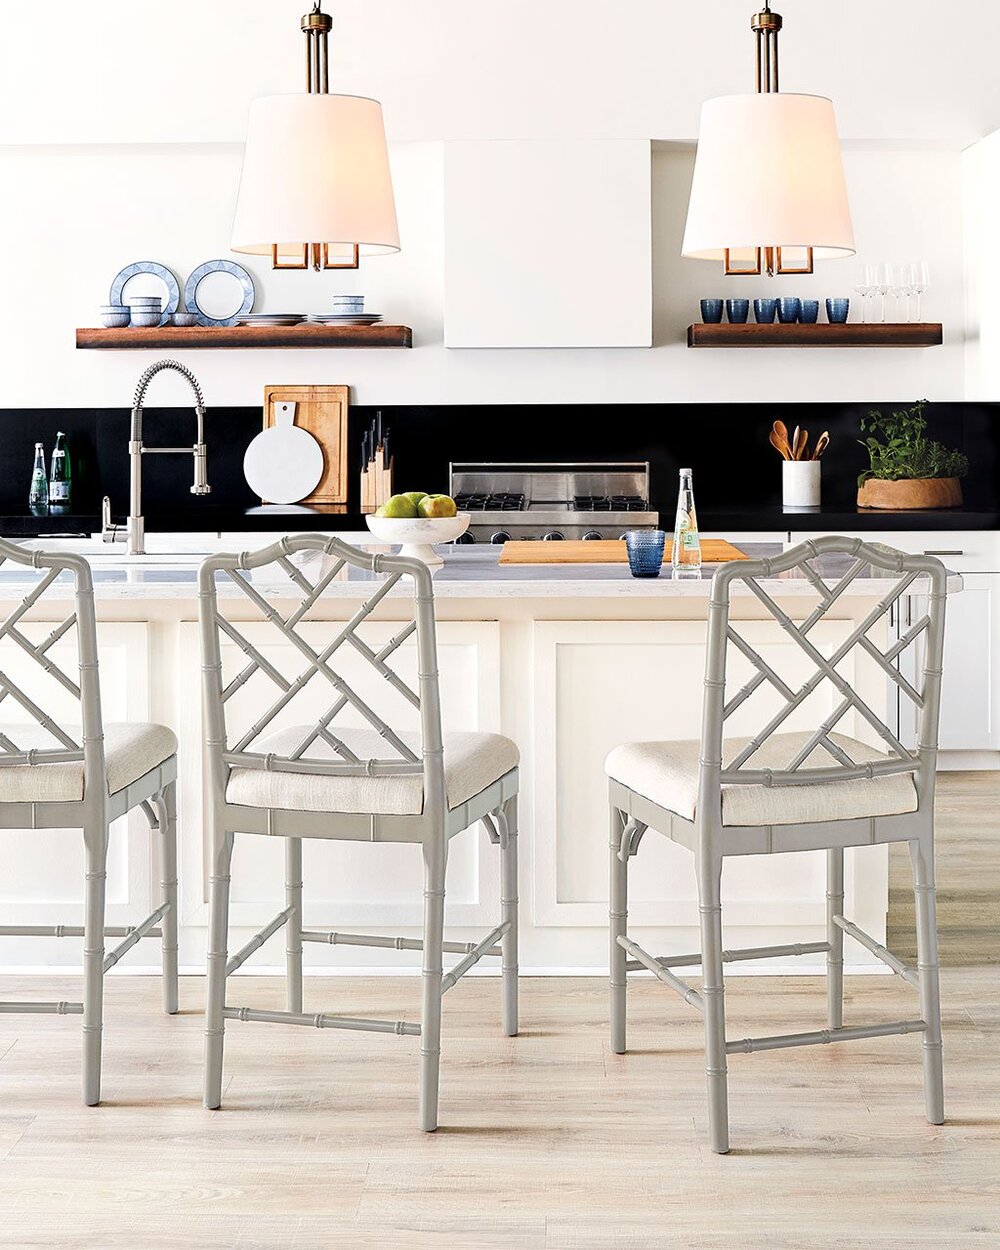 Barstools And Counter Height Stools, How Much Room For Counter Stools